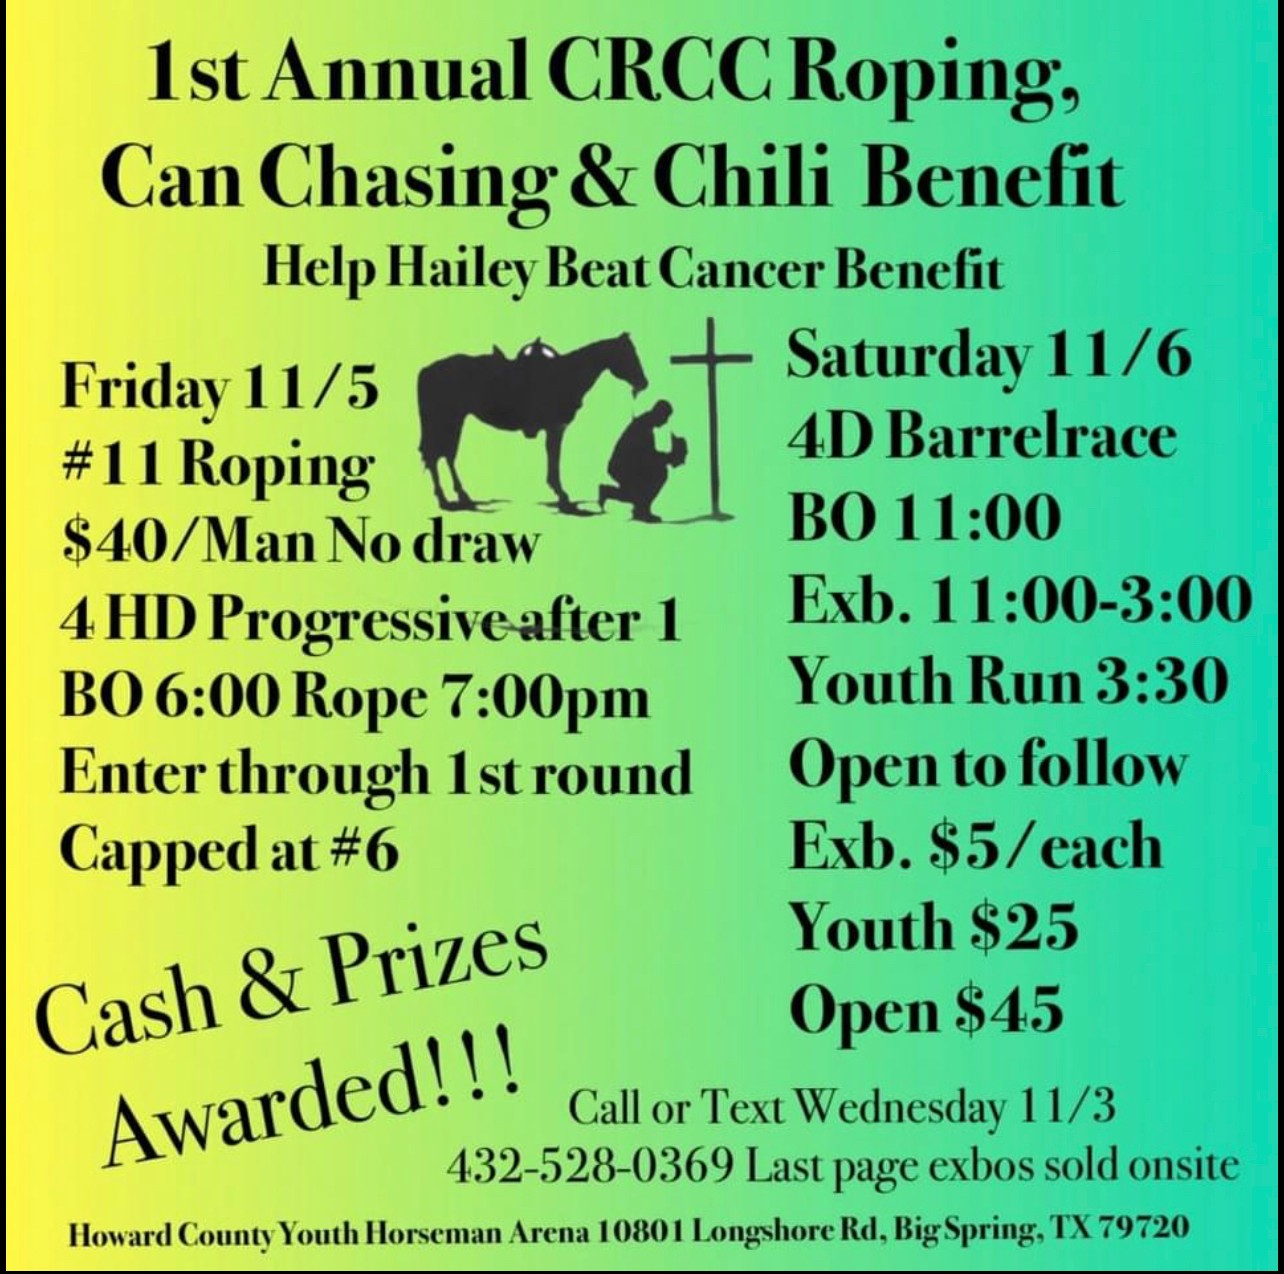 1st Annual CRCC Roping, Can Chasing & Chili Benefit